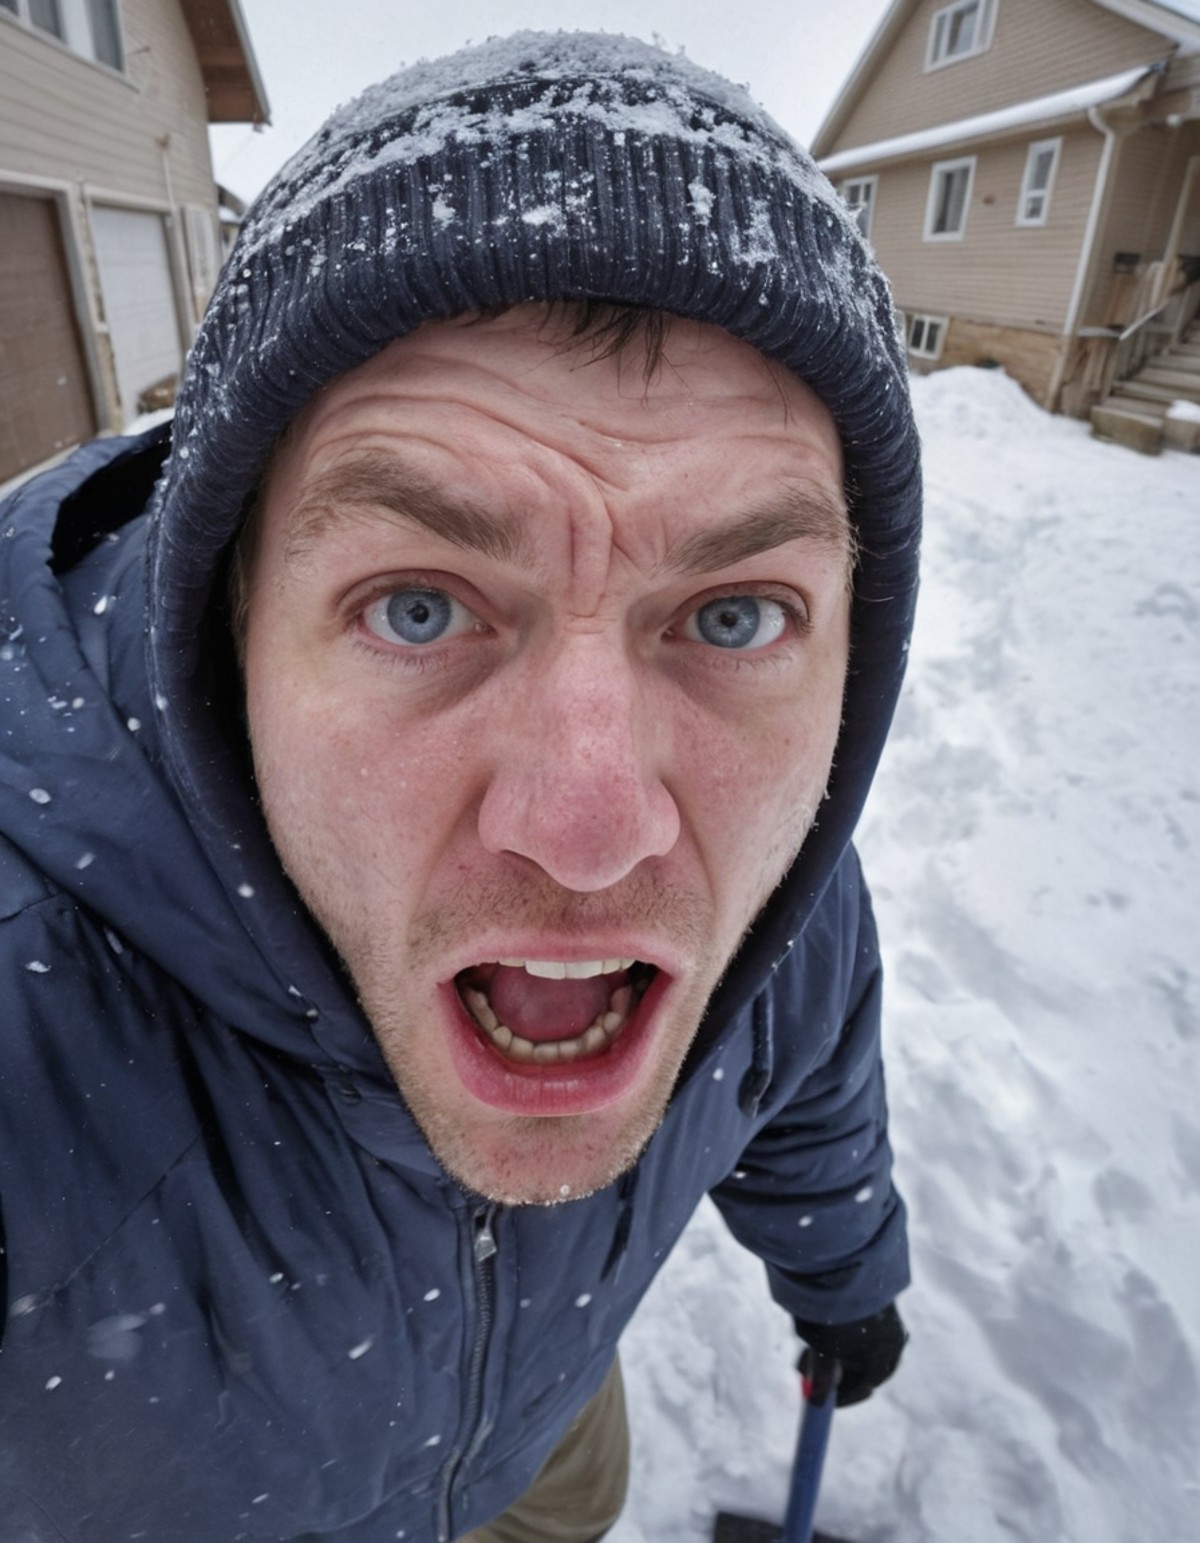 amateur close-up photo of man, angry at the snow in the driveway, driveway covered in deep snow, snow shovel on the ground...